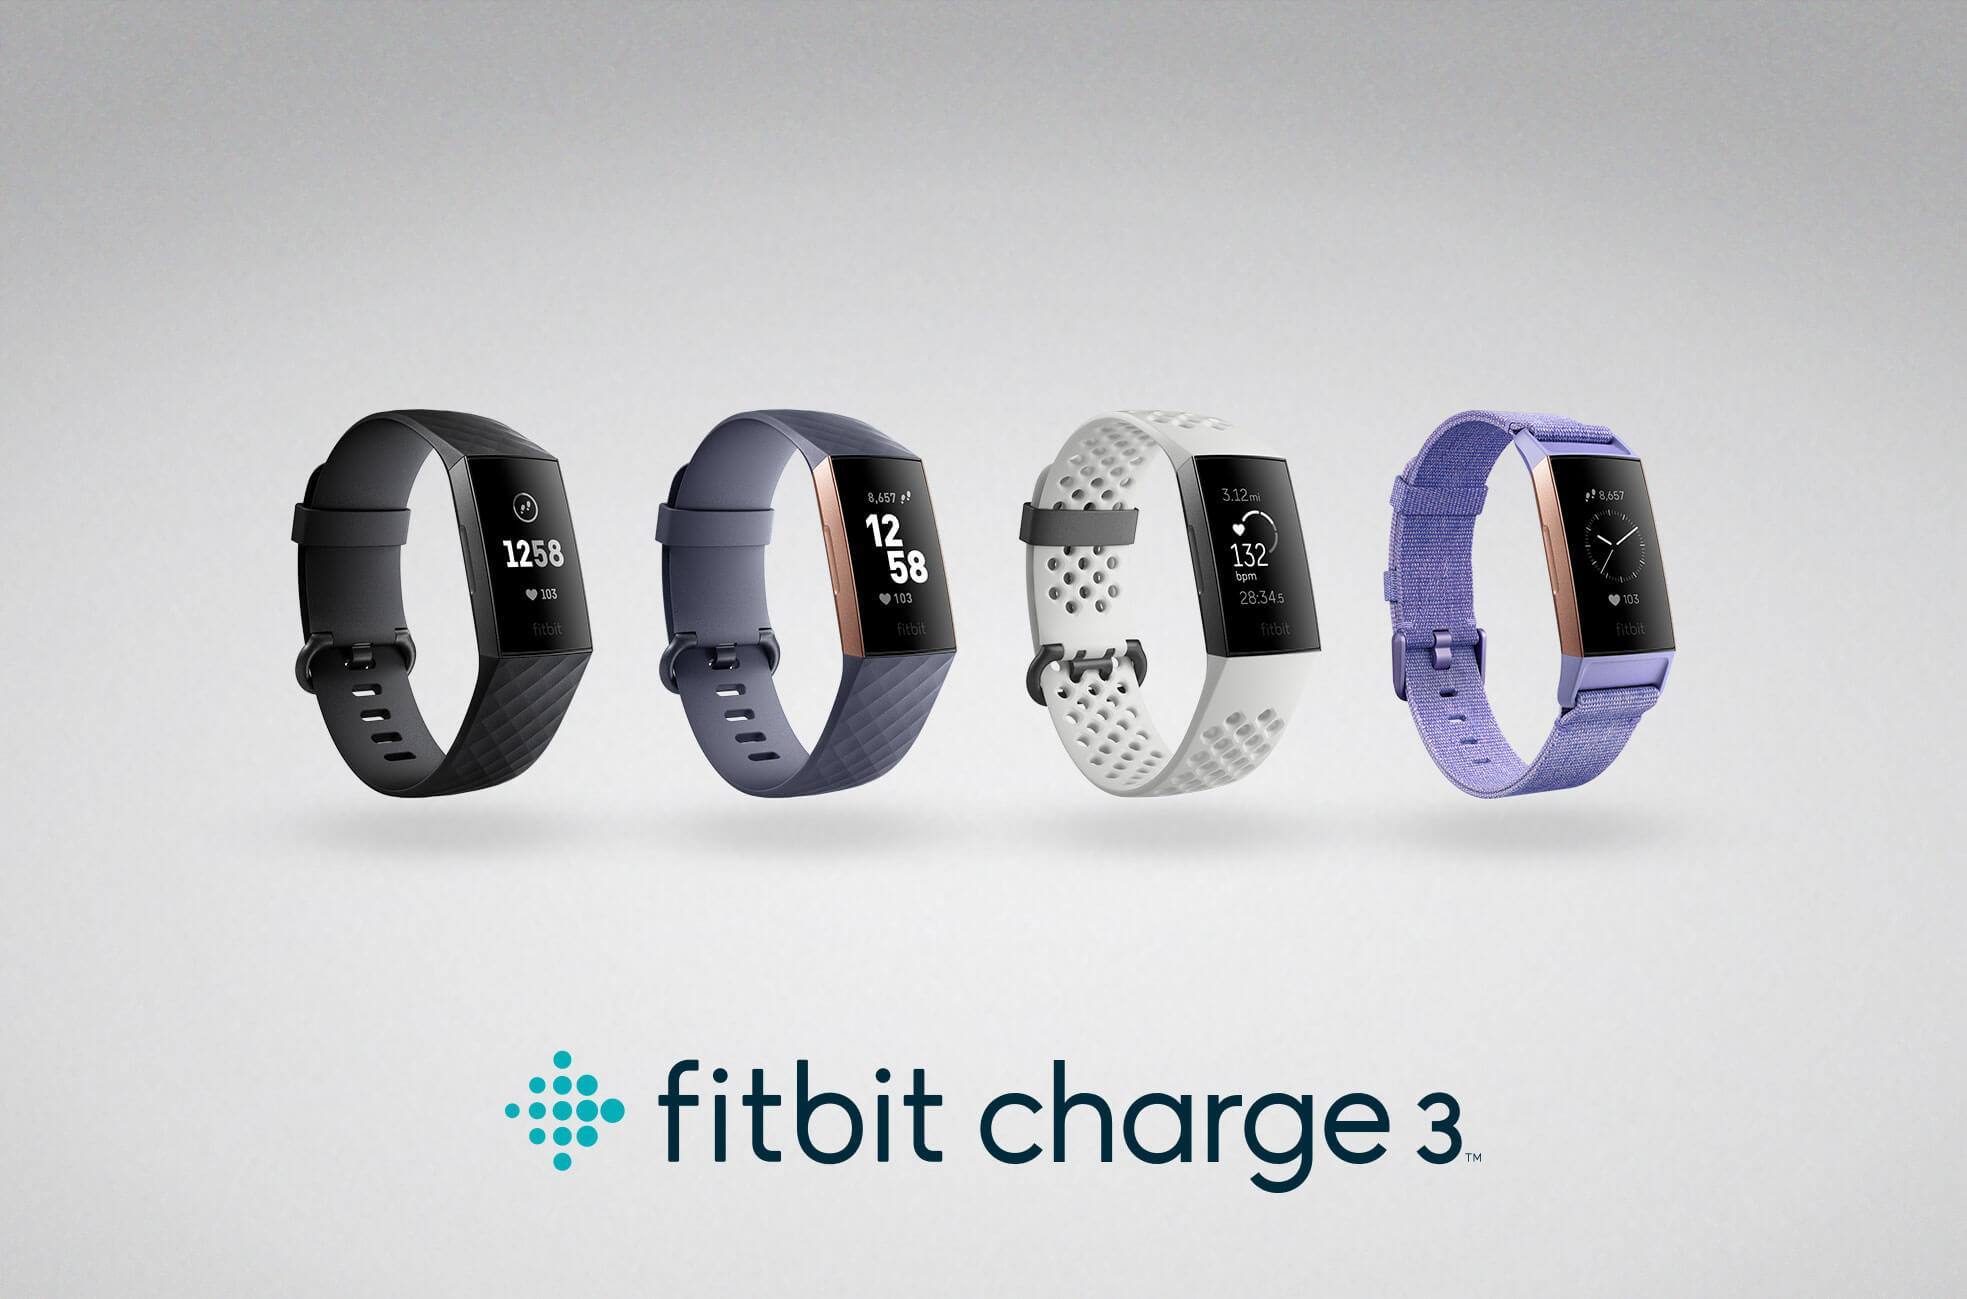 what is the lifespan of a fitbit charge 3